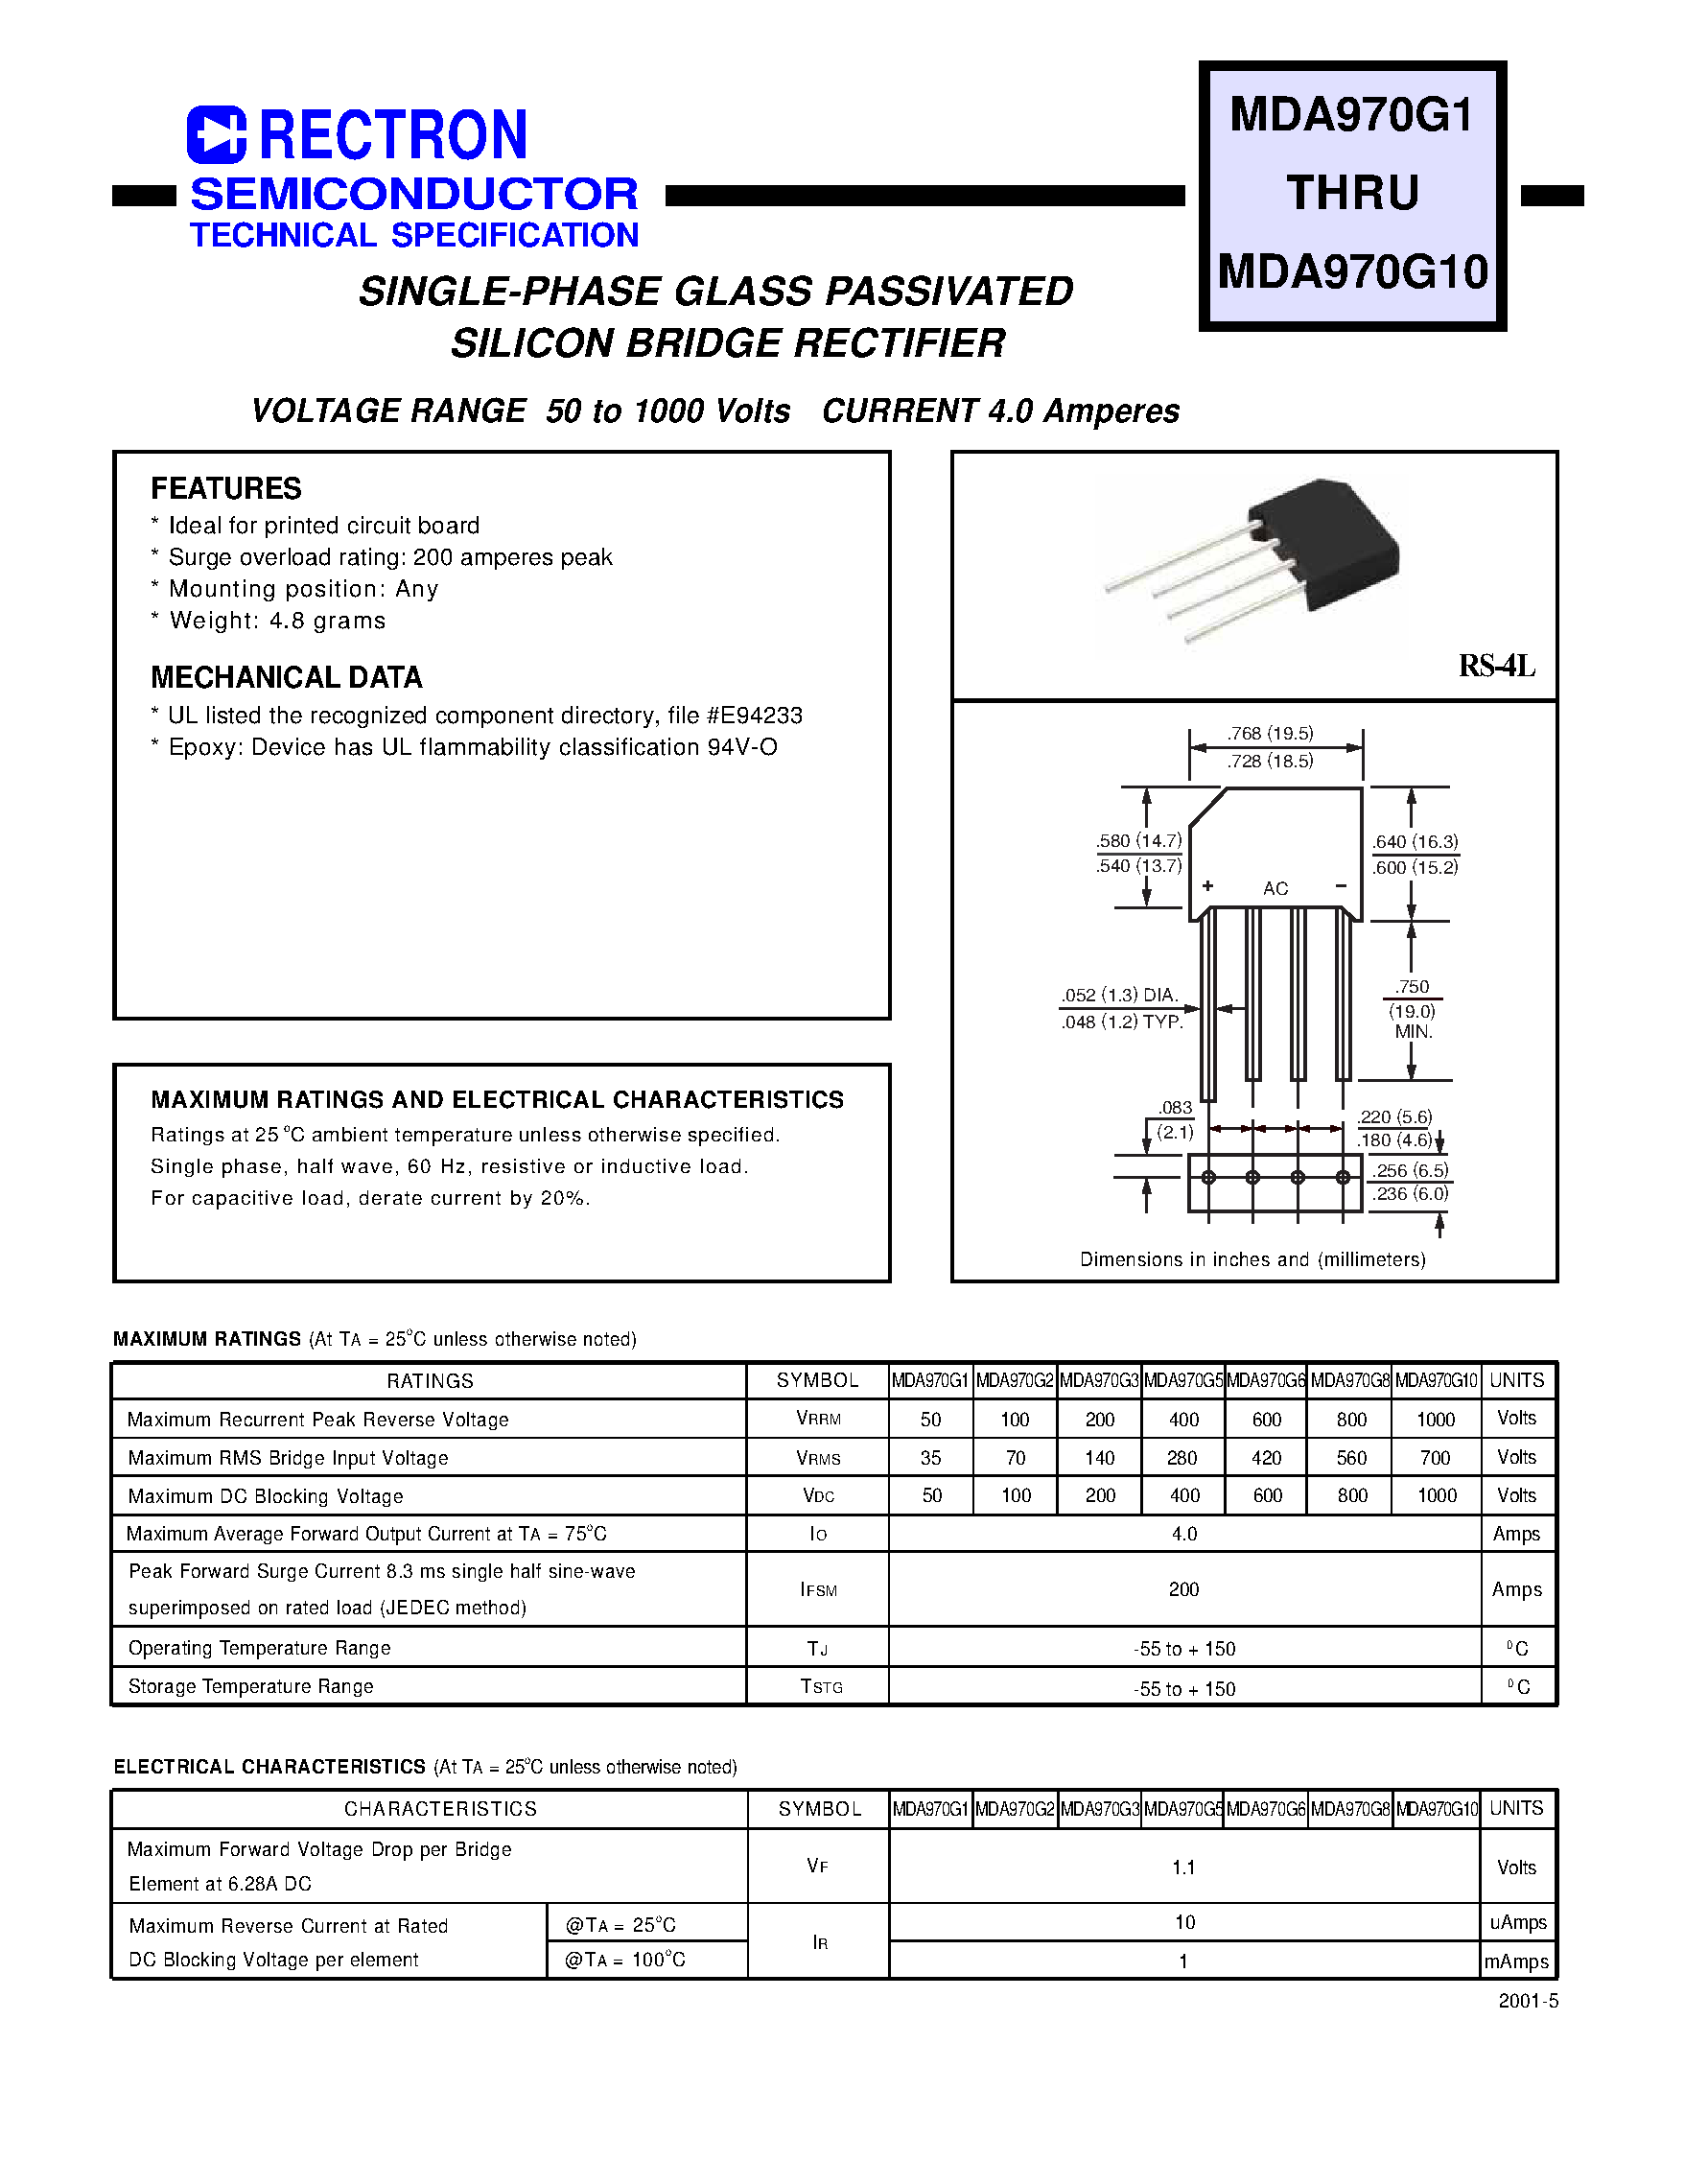 Datasheet MDA970G10 - SINGLE-PHASE GLASS PASSIVATED SILICON BRIDGE RECTIFIER (VOLTAGE RANGE 50 to 1000 Volts CURRENT 4.0 Amperes) page 1